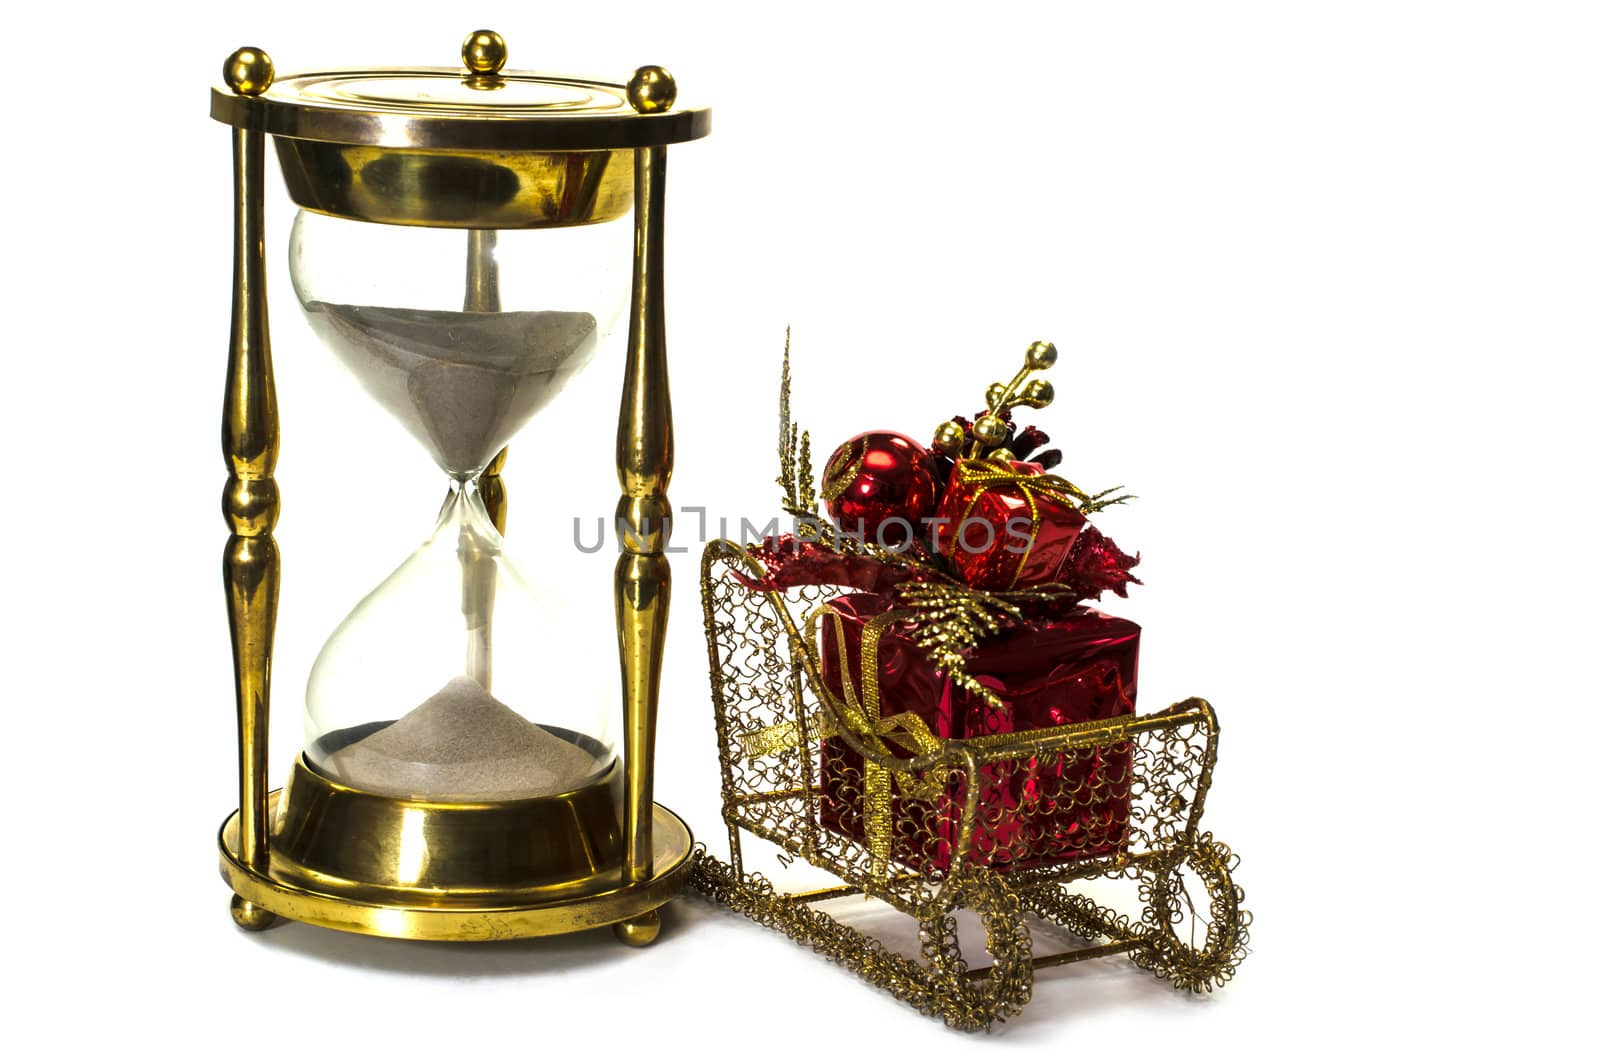 Christmas gift on sleigh and hourglass on white background.  Concept showing time running out for Christmas shopping.